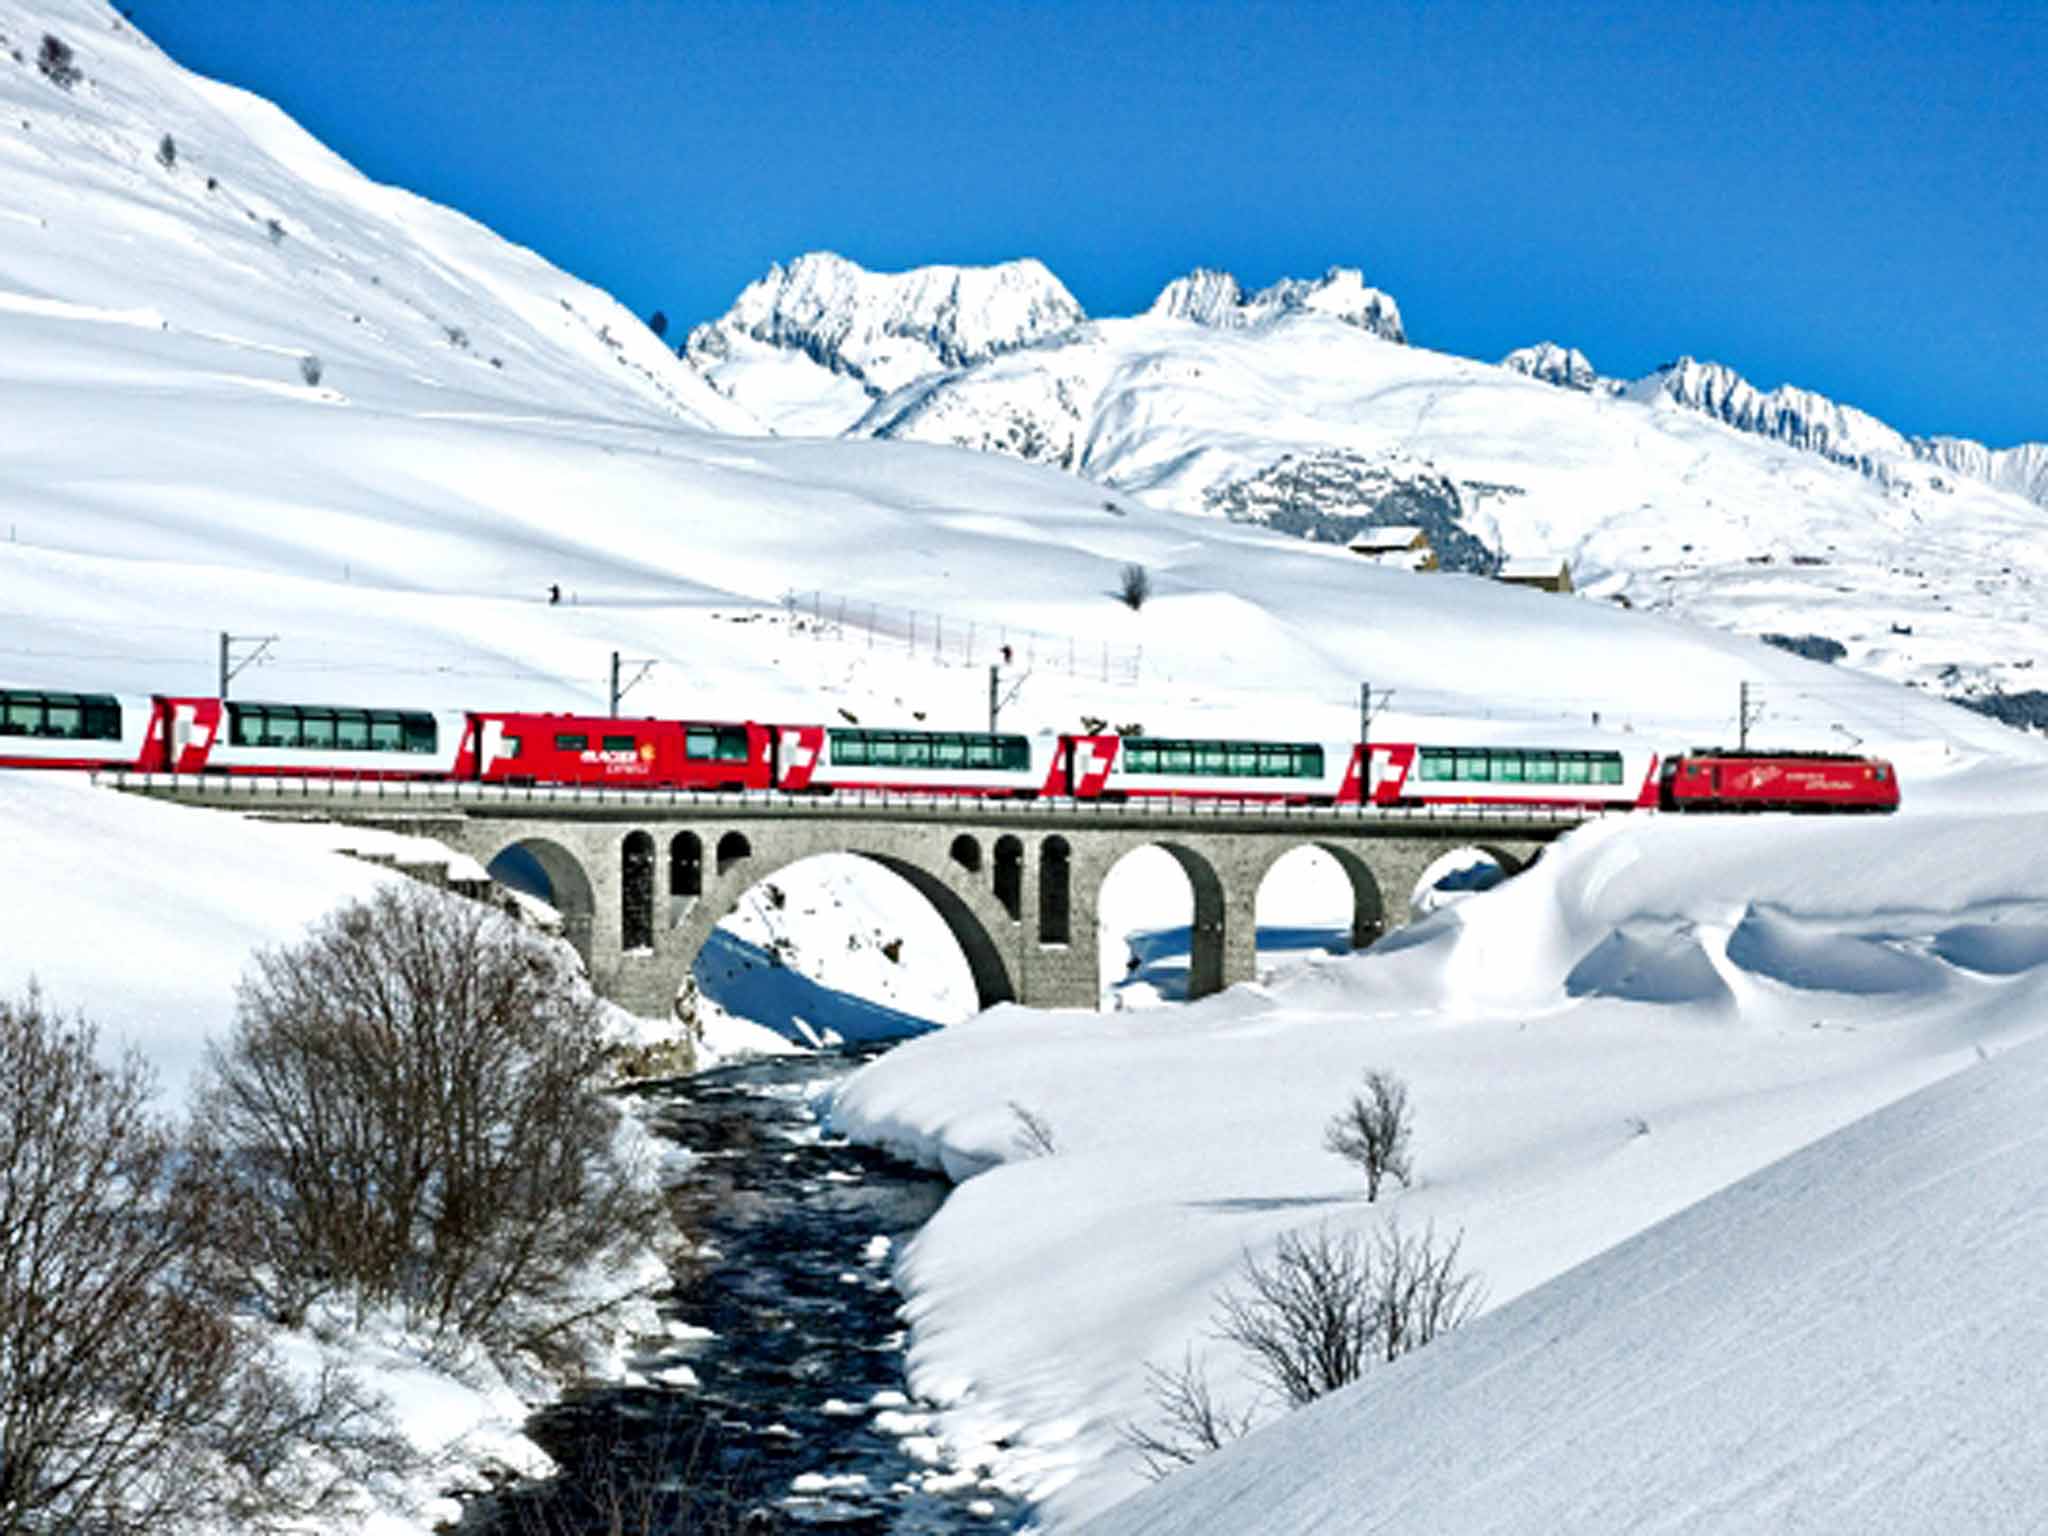 Breathtaking Swiss rail routes include the Glacier Express from Zermatt to St Moritz or Davos (swiss-image.ch/Christof Sonderegger)